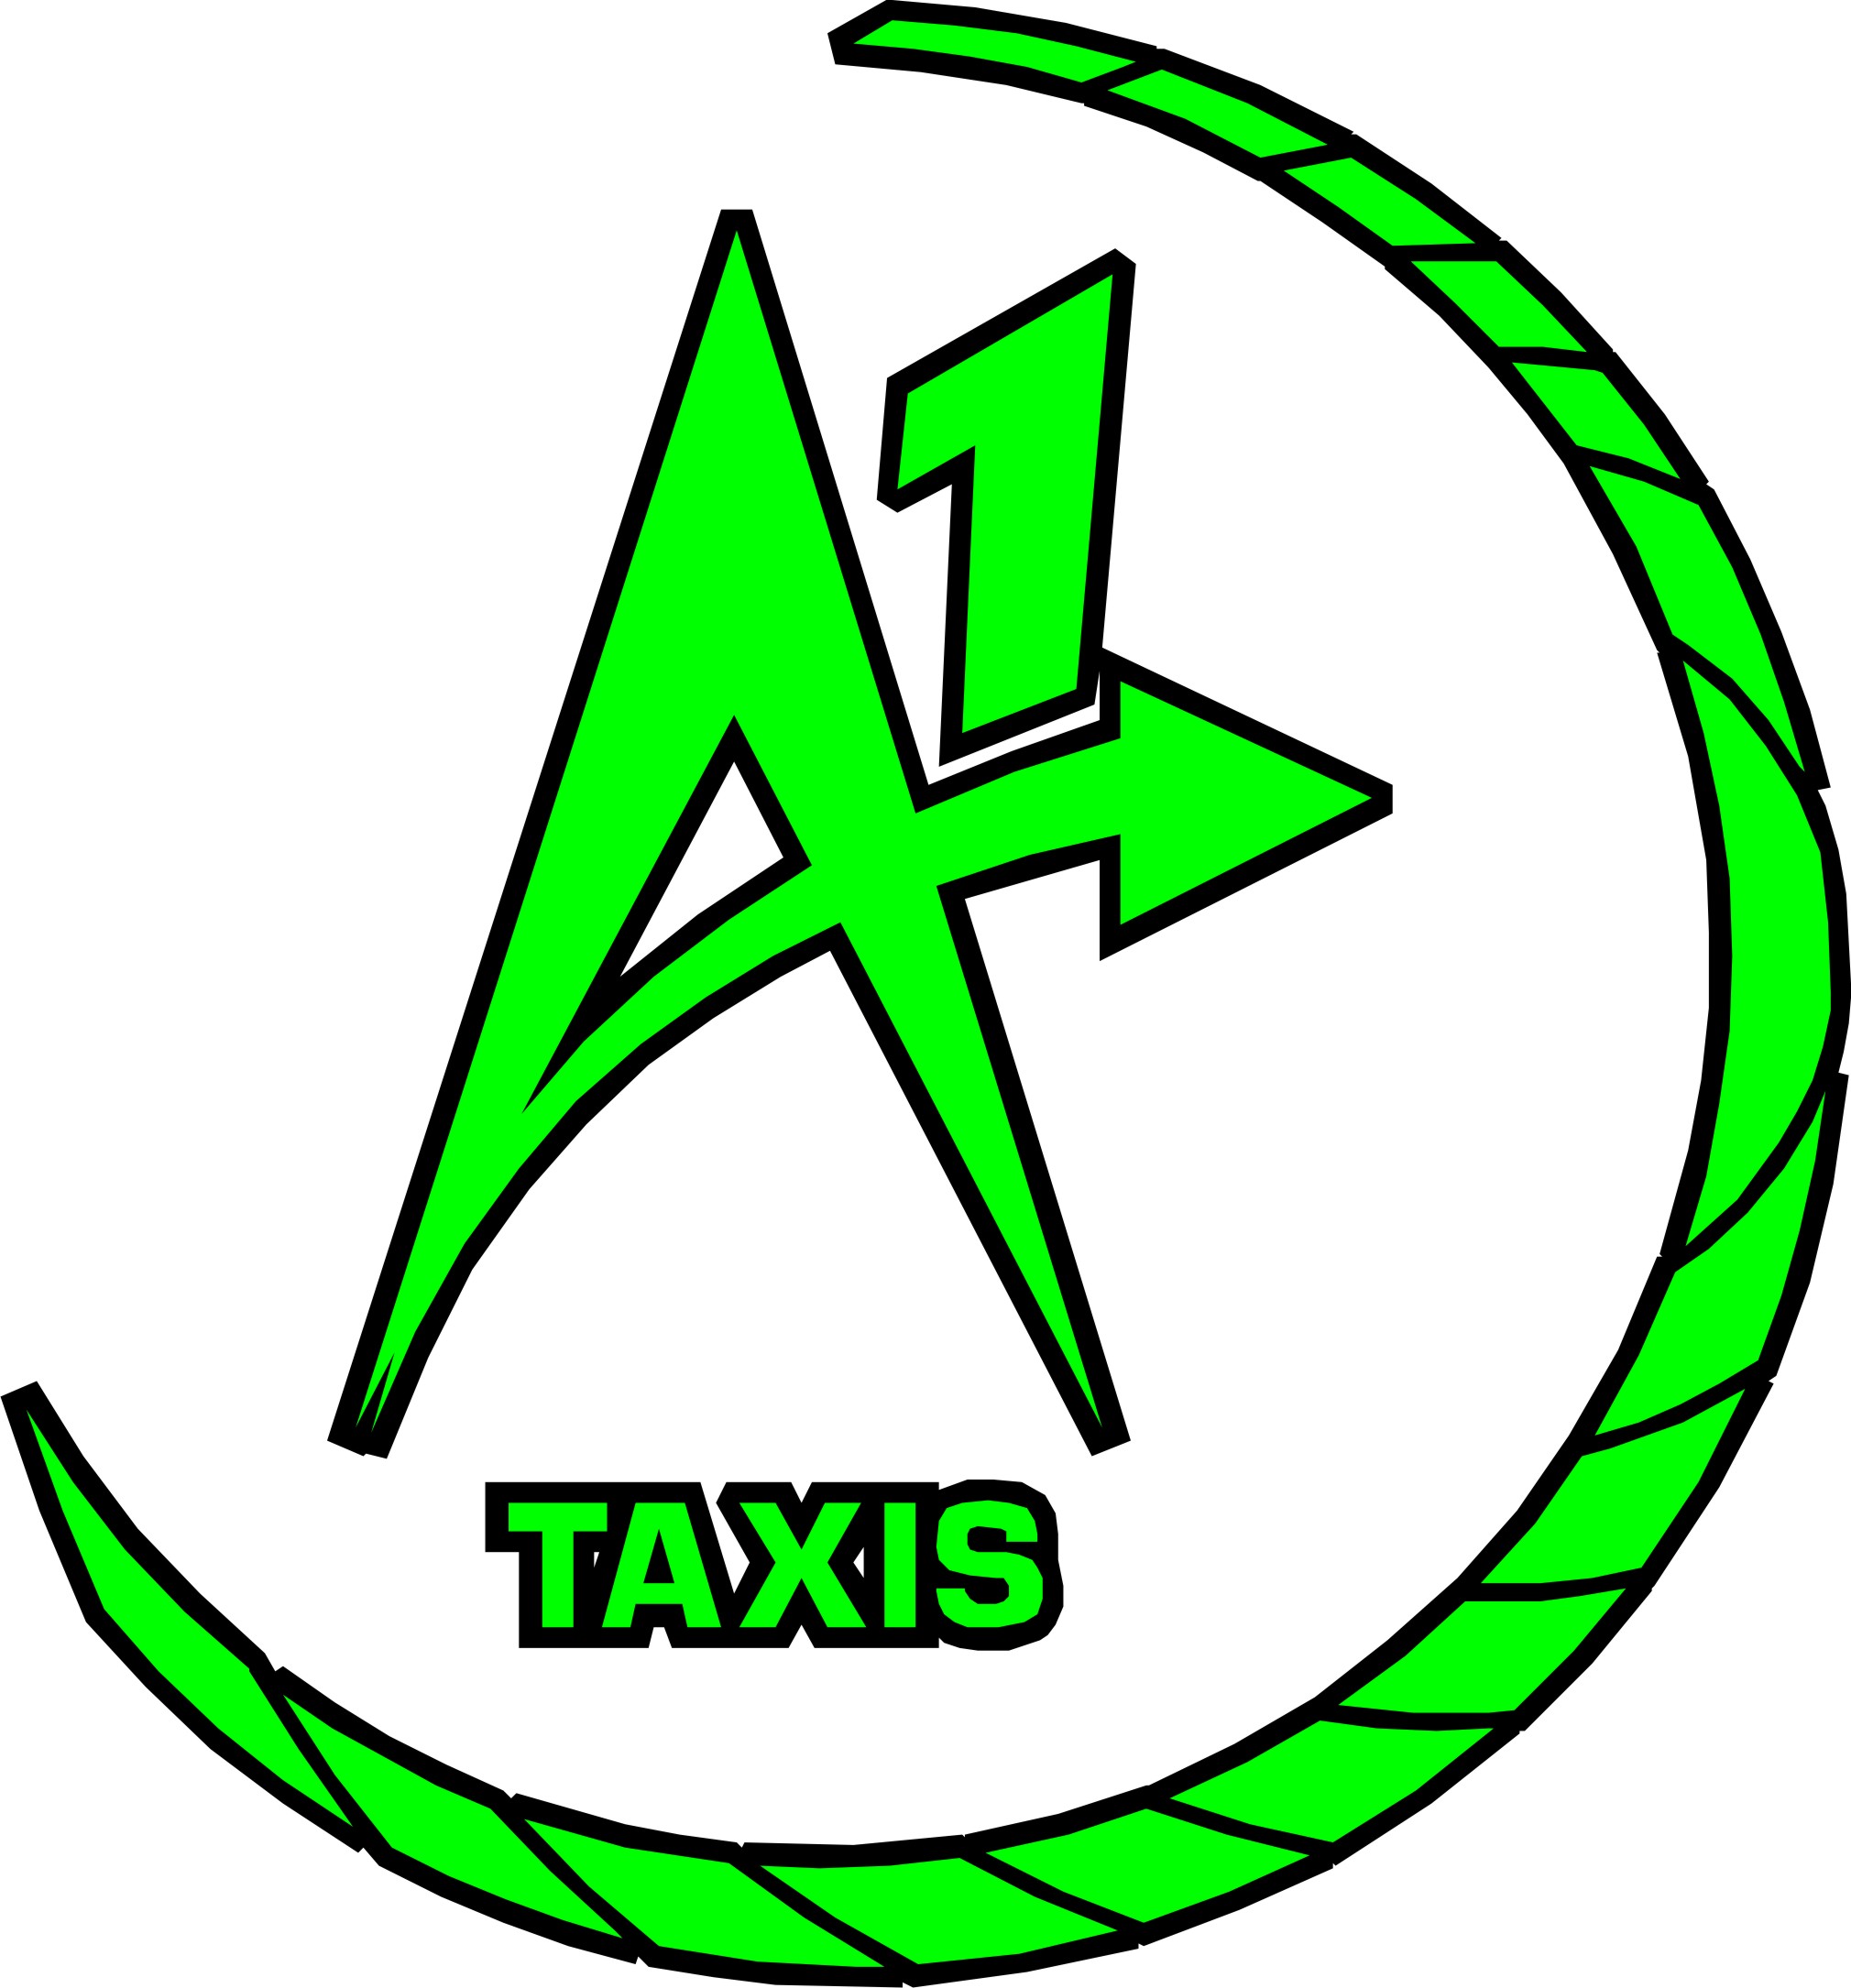 A1 taxis eastleigh providing a service covering chandlers ford, boyatt wood and southampton airport parkway and all the cruise terminals as well as areas that surround eastleigh and hampshire